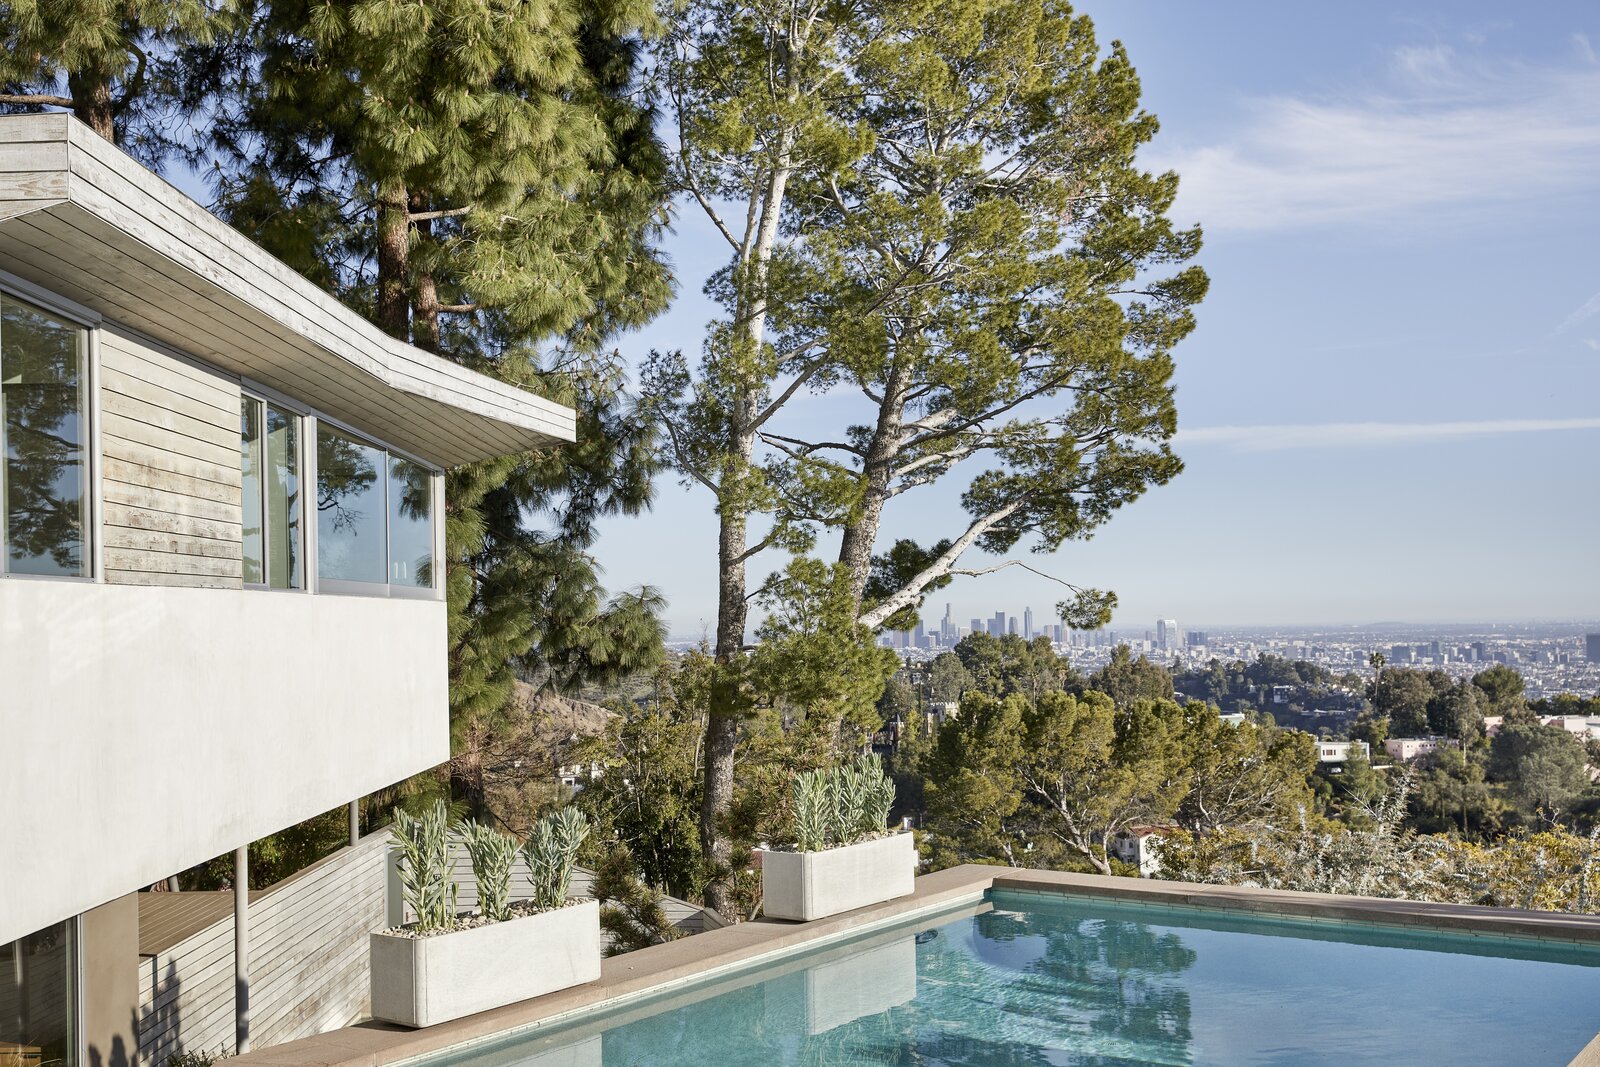 An Award-Winning Home in the Hollywood Hills